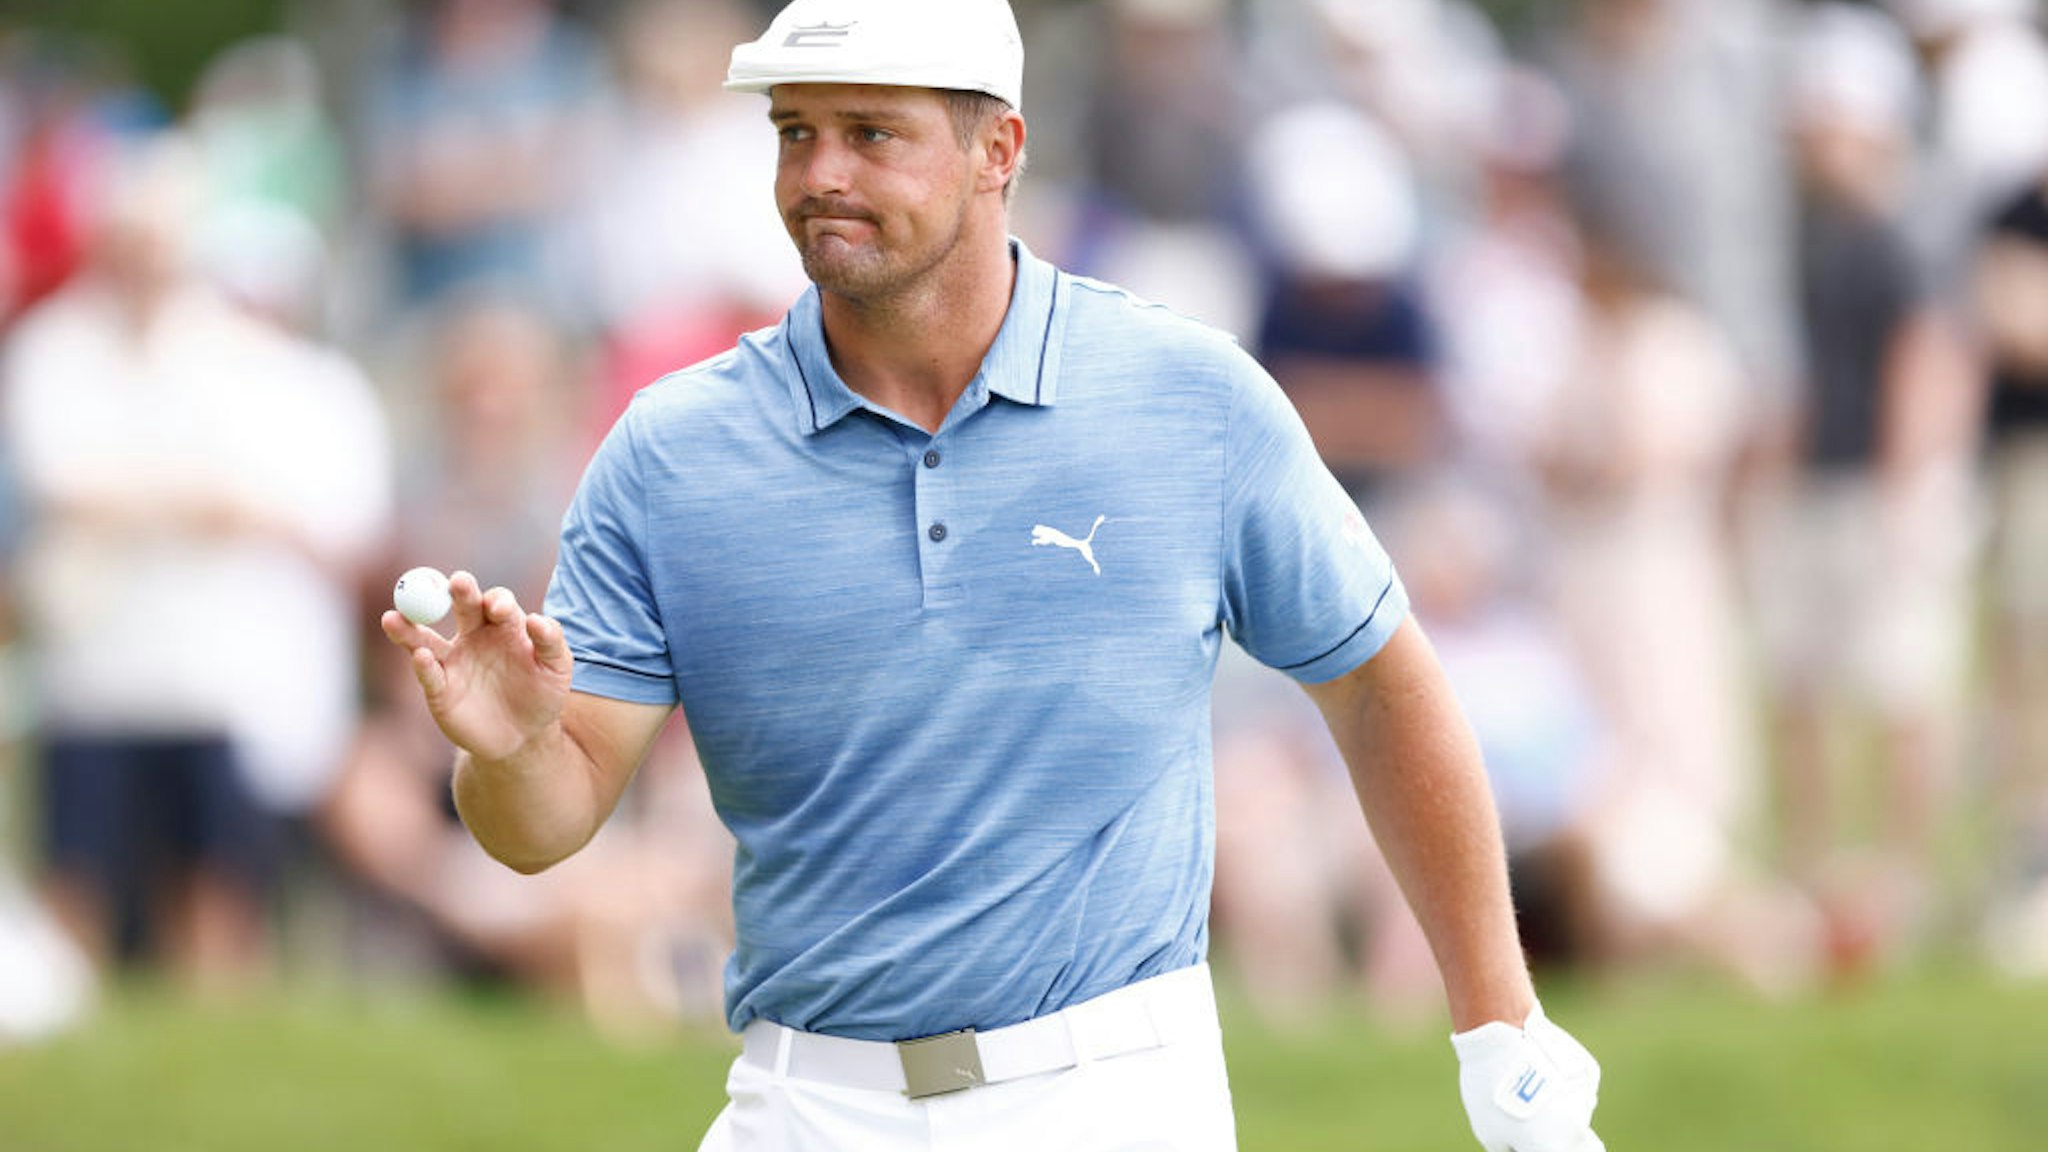 CROMWELL, CONNECTICUT - JUNE 26: Bryson DeChambeau of the United States reacts to his putt on the seventh green during the third round of the Travelers Championship at TPC River Highlands on June 26, 2021 in Cromwell, Connecticut. (Photo by Michael Reaves/Getty Images)